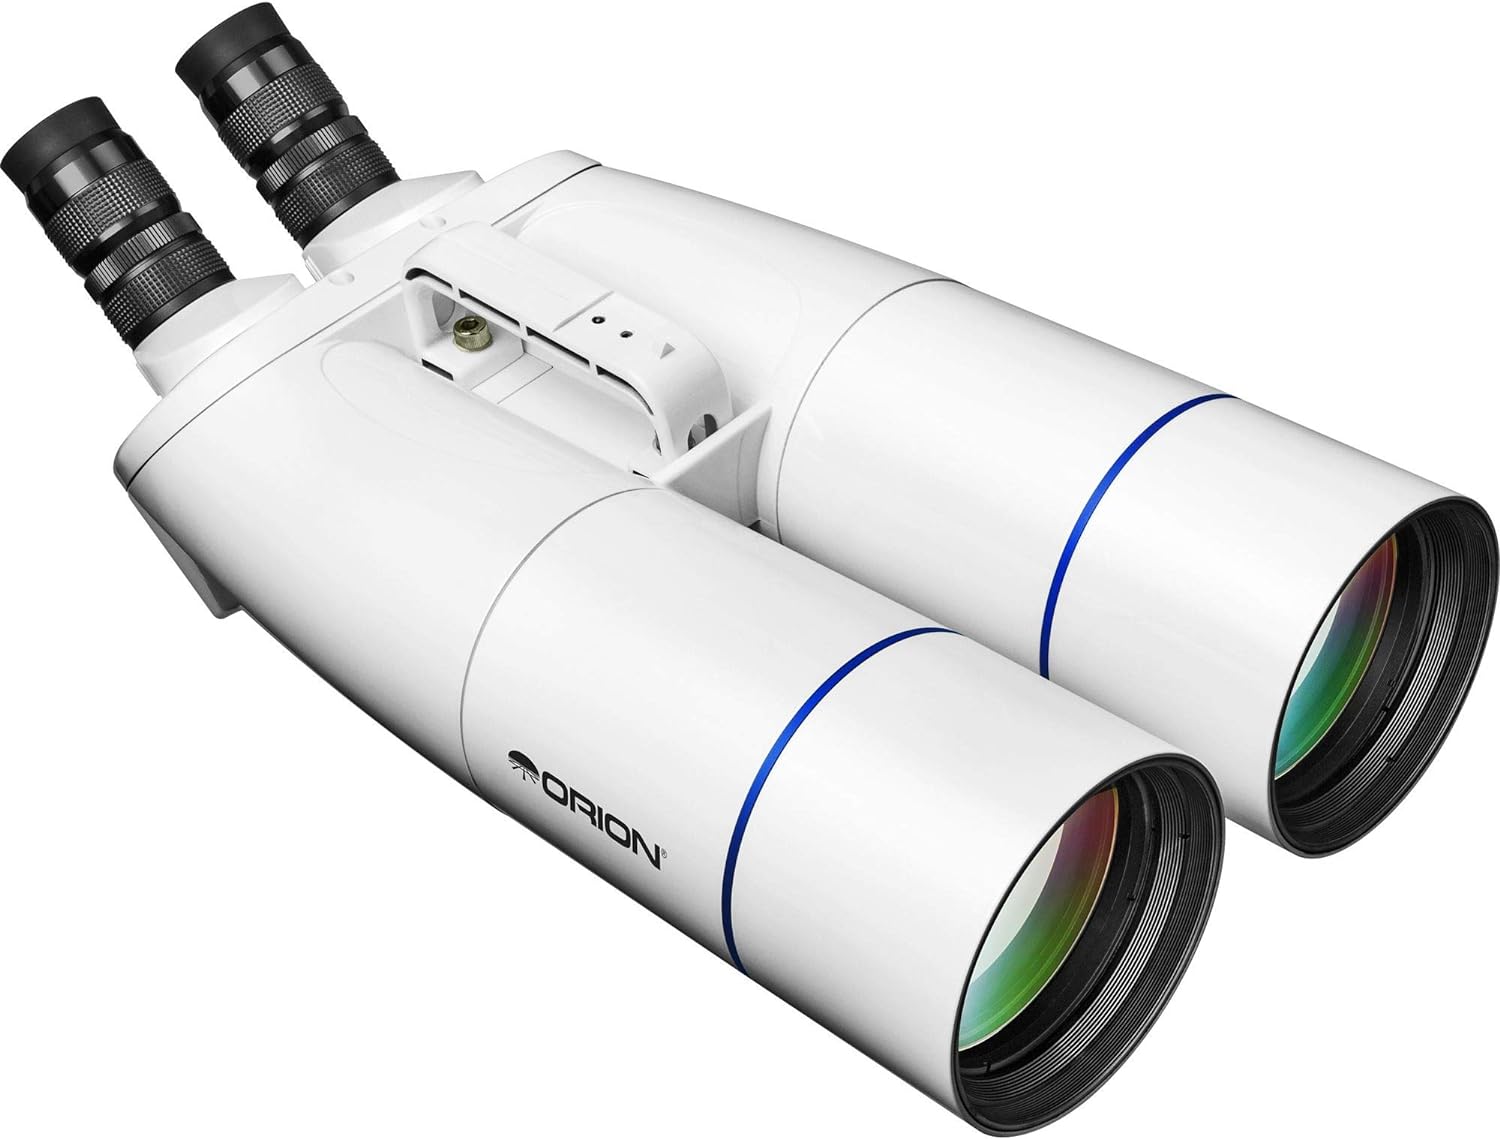 Orion GiantView BT-100 Binocular Telescope for Advanced Astronomers - Delivers an Immersive Observing Experience of Starry Skies and Daytime Scenes